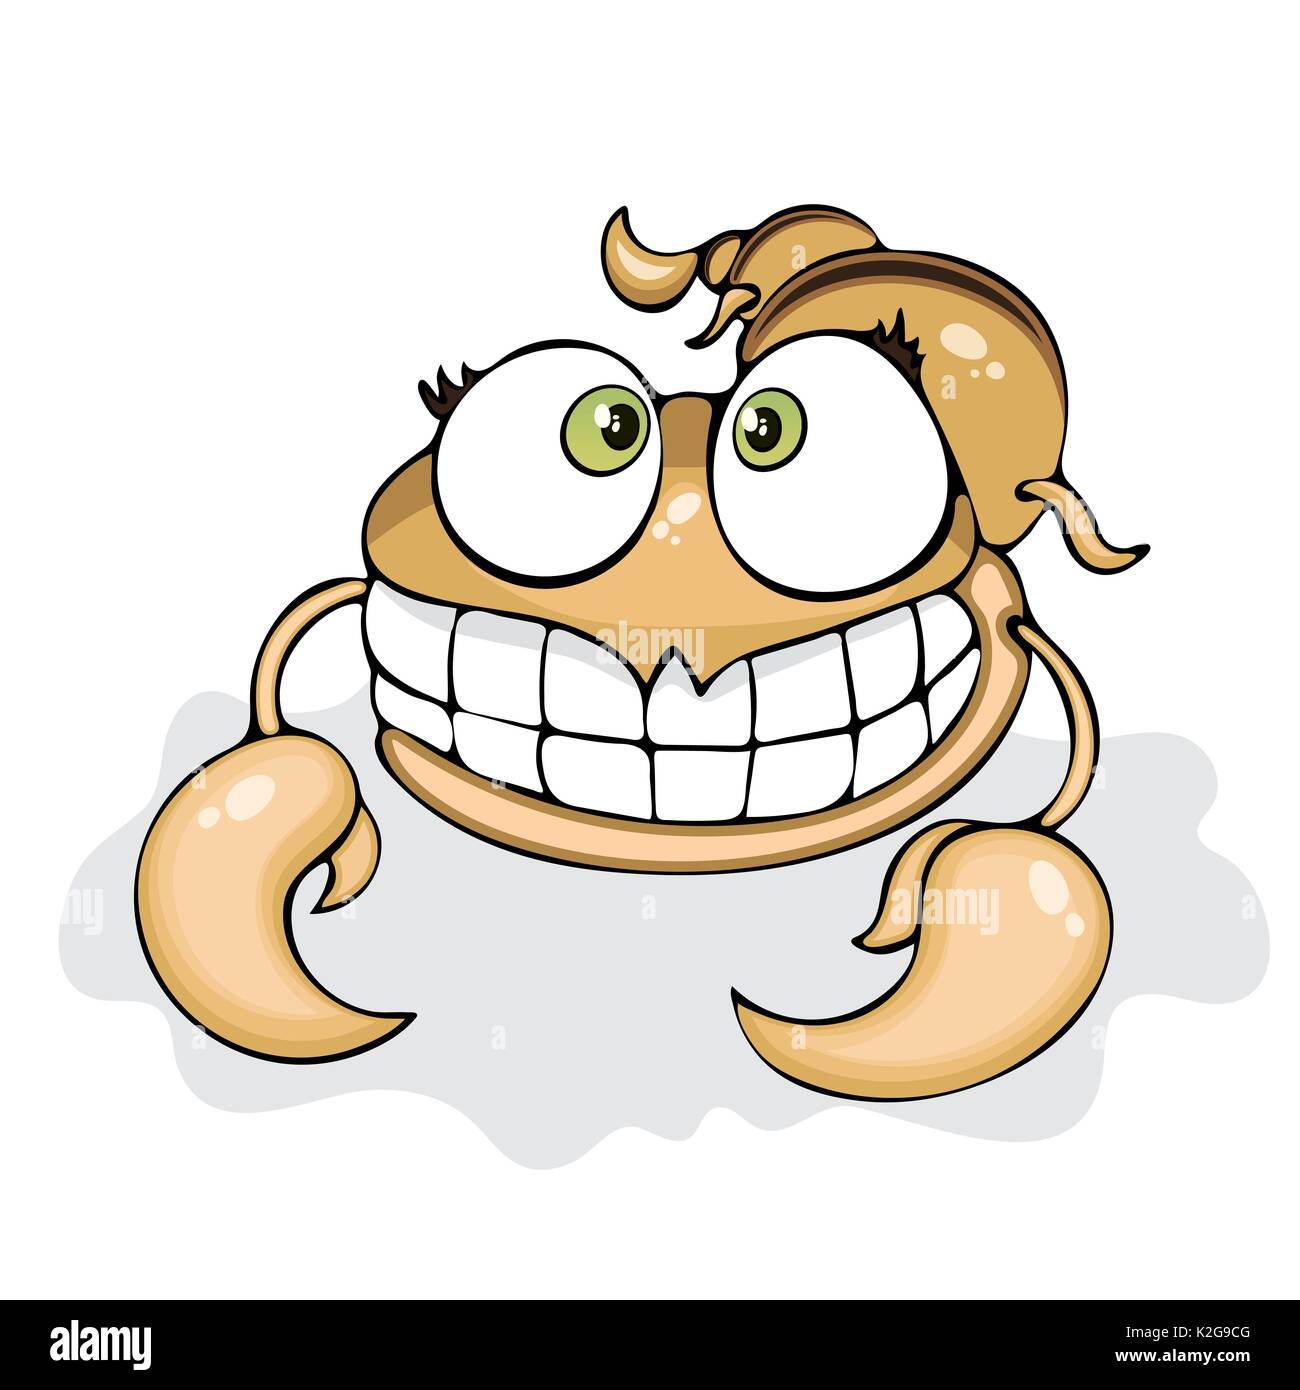 cartoon-funny-scorpion-painted-character-isolated-on-white-background-K2G9CG.jpg